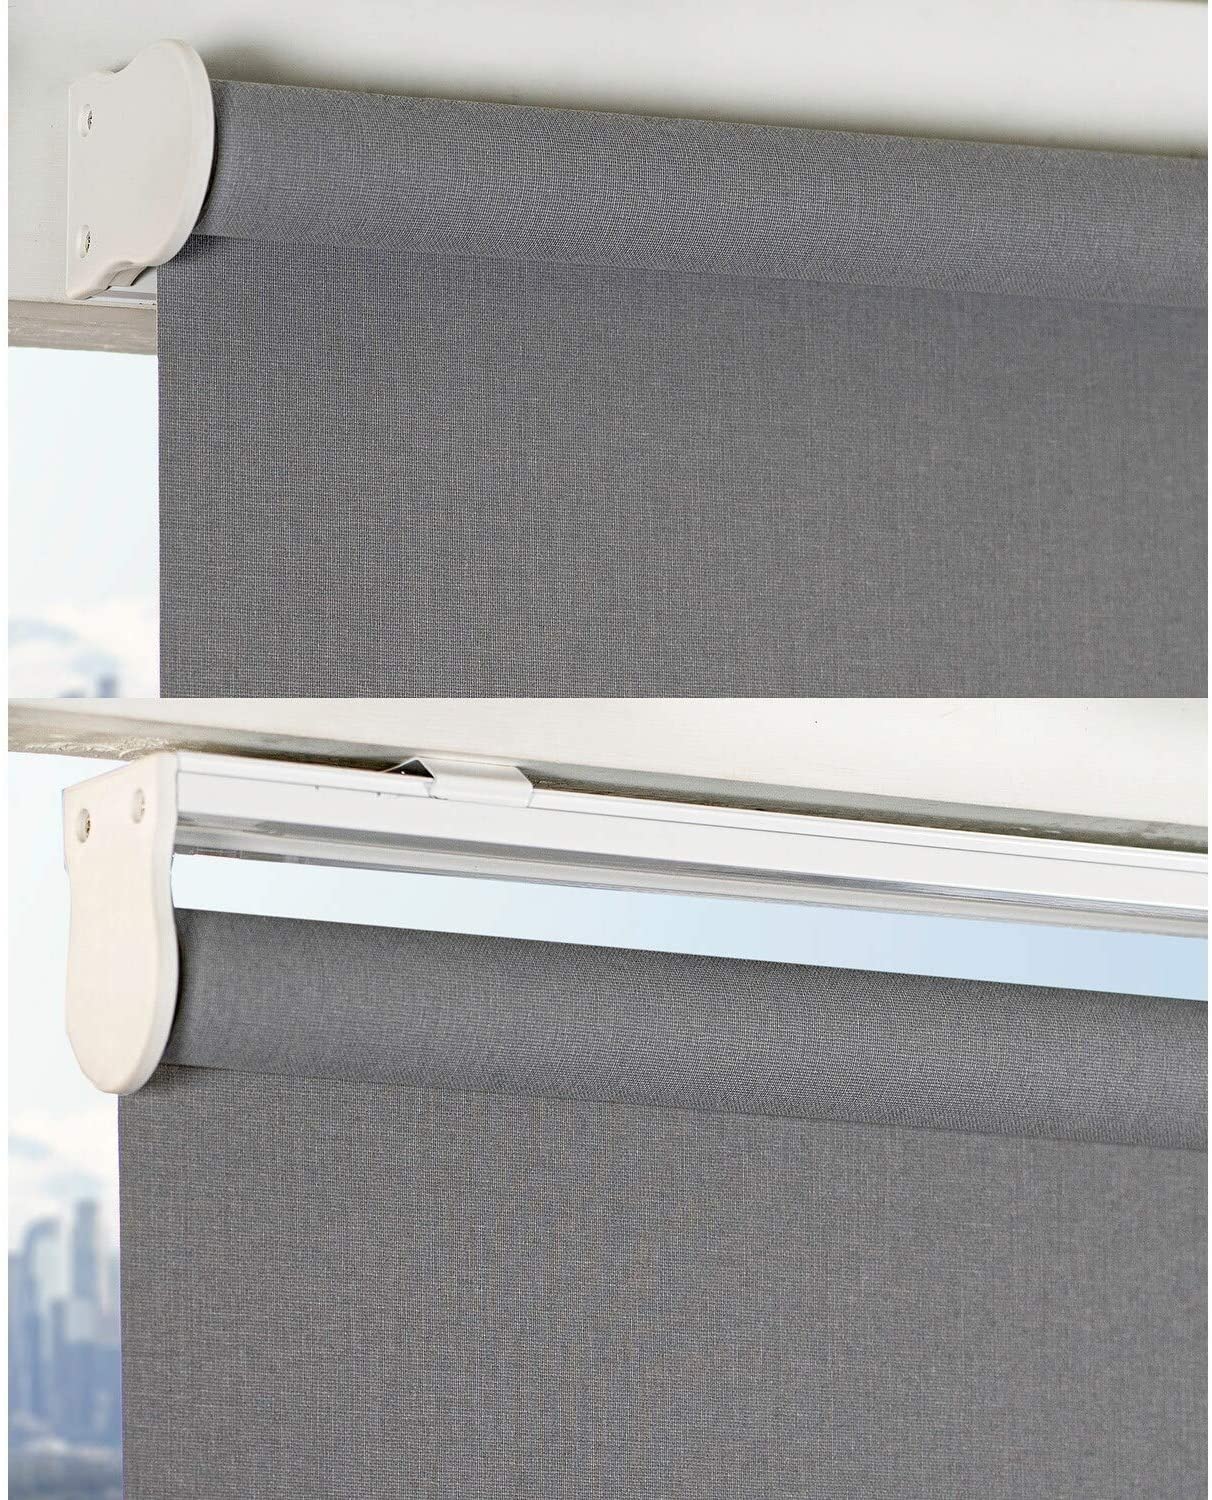 Light Filtering Cordless Roller Shades 42" w X 72" h Grey Modern Contemporary Polyester